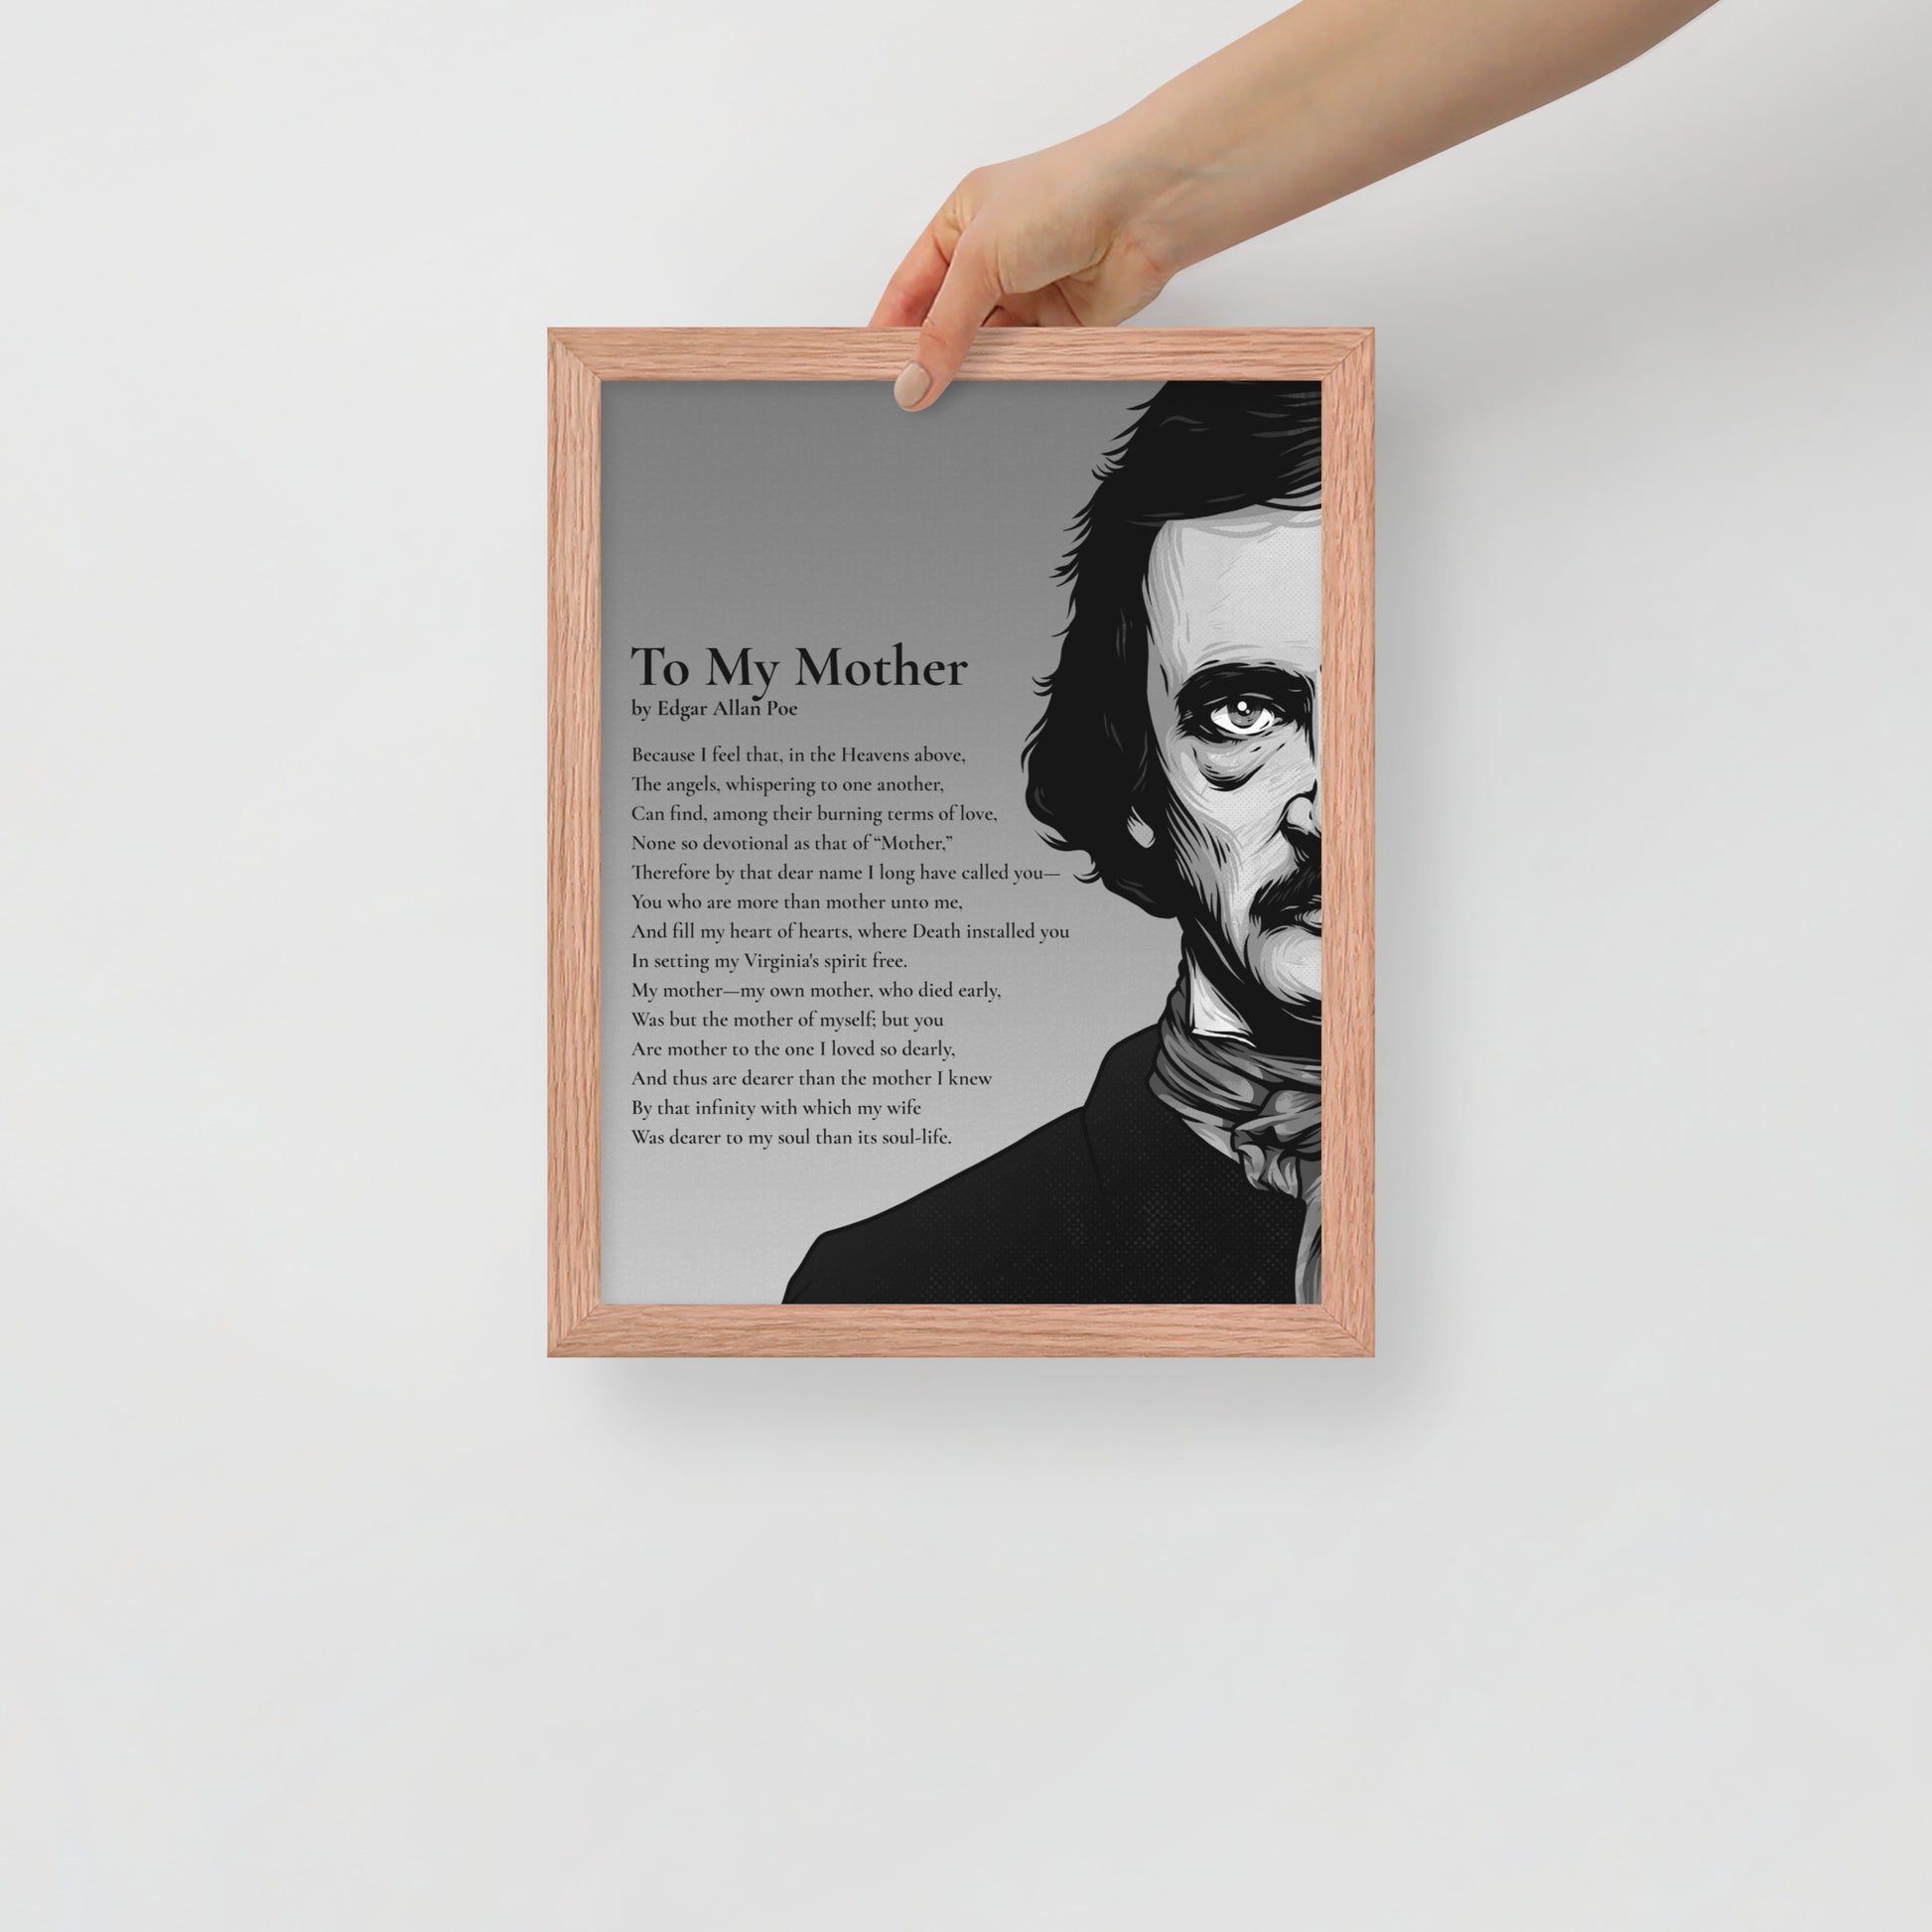 Edgar Allan Poe's 'To My Mother' Framed Matted Poster - 11 x 14 Red Oak Frame